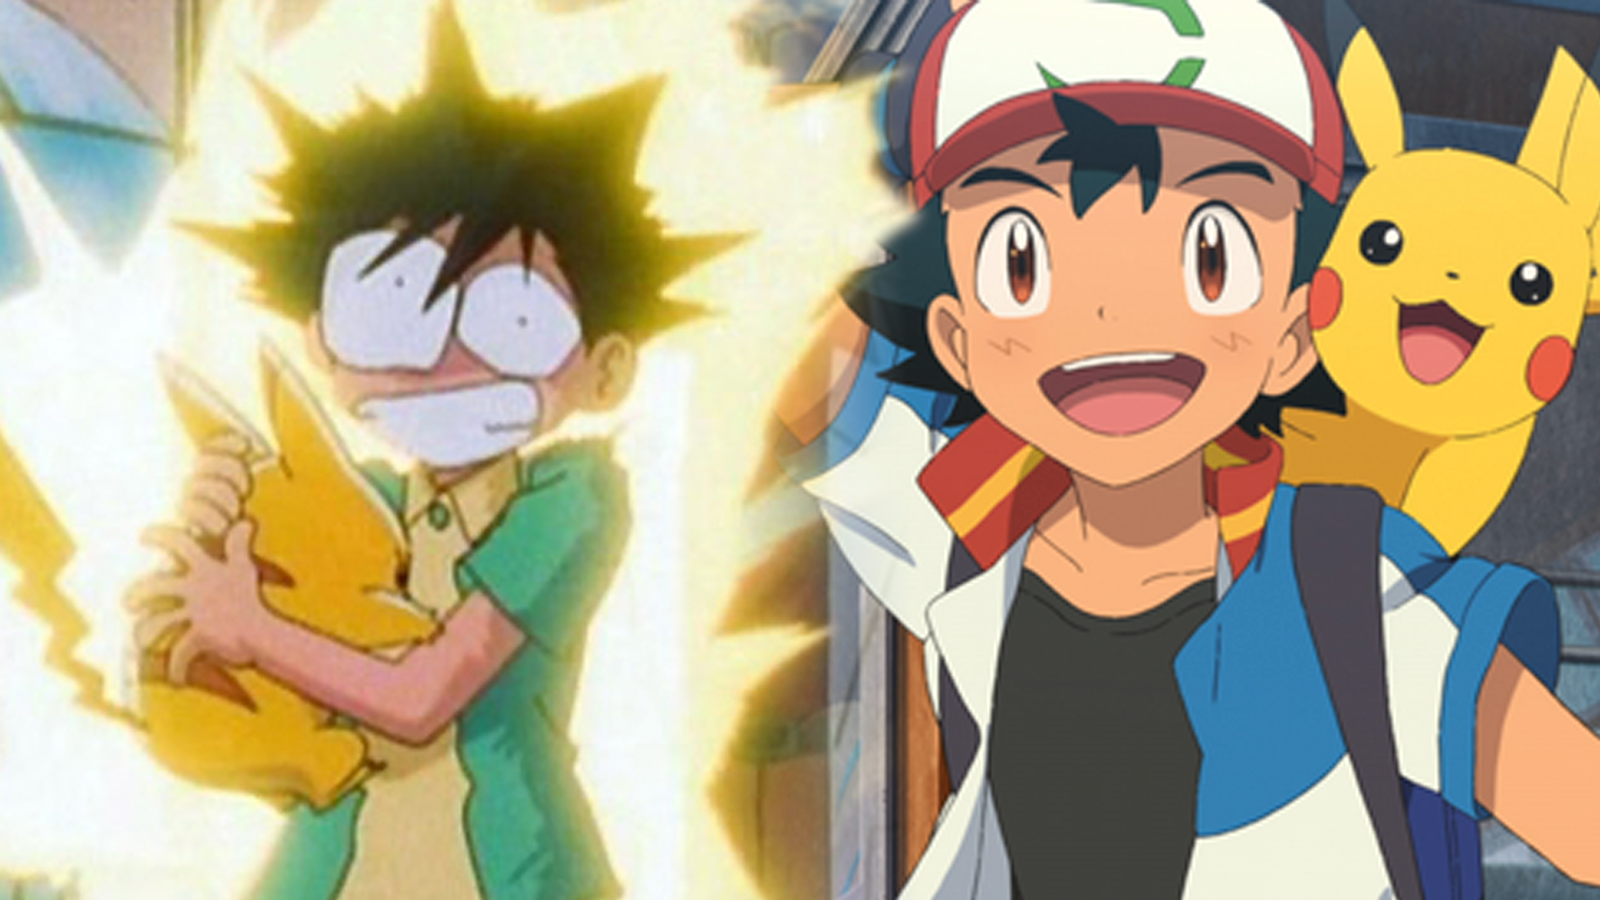 Pokemons Ash Ketchum becomes world champion after 25 years